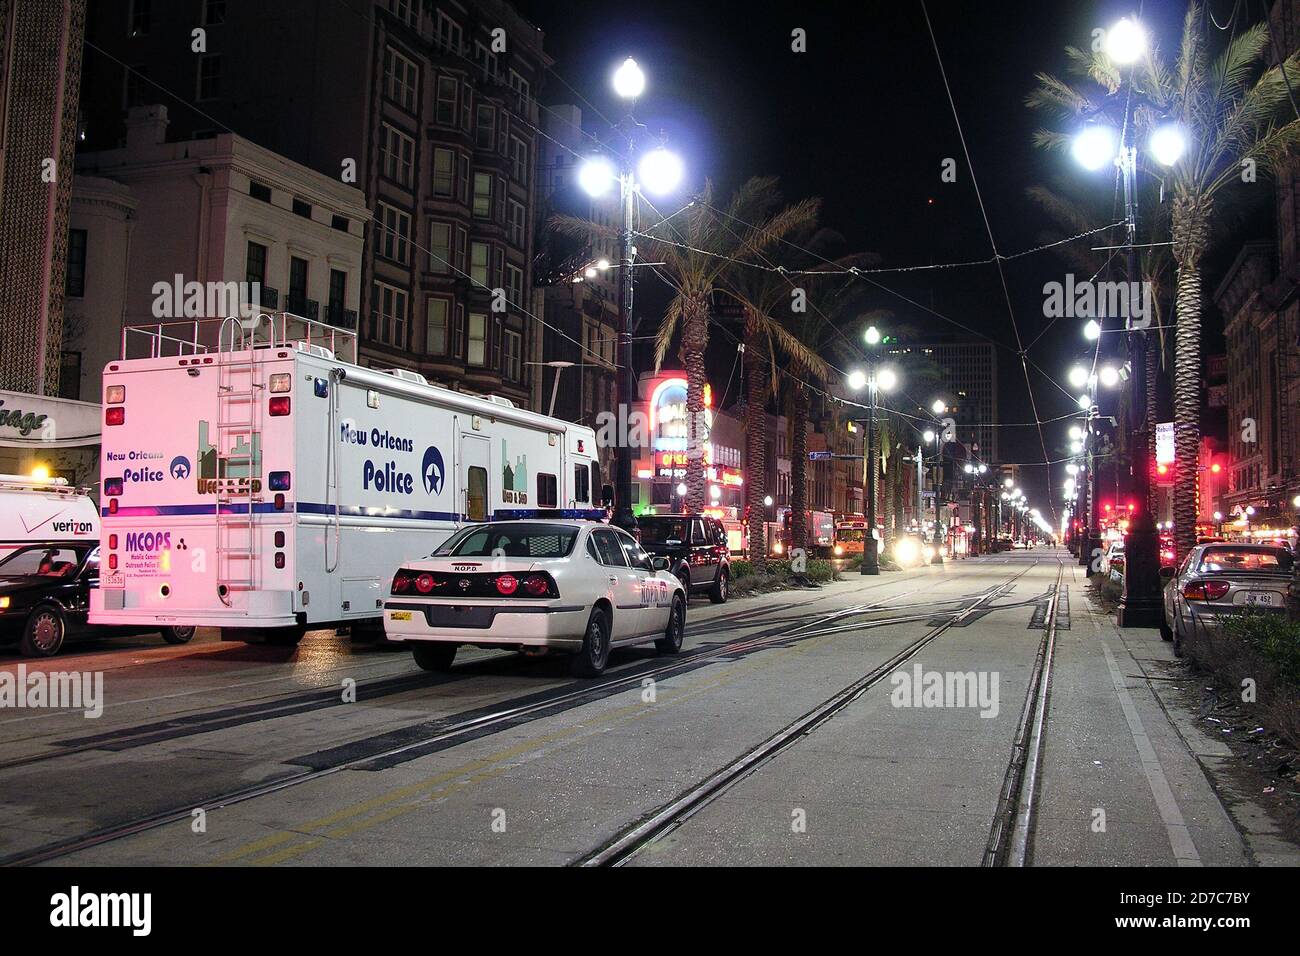 NEW ORLEANS, LOUISIANA, USA - DECEMBER 12, 2005:  Police vehicles stand watch on Canal Street. Stock Photo